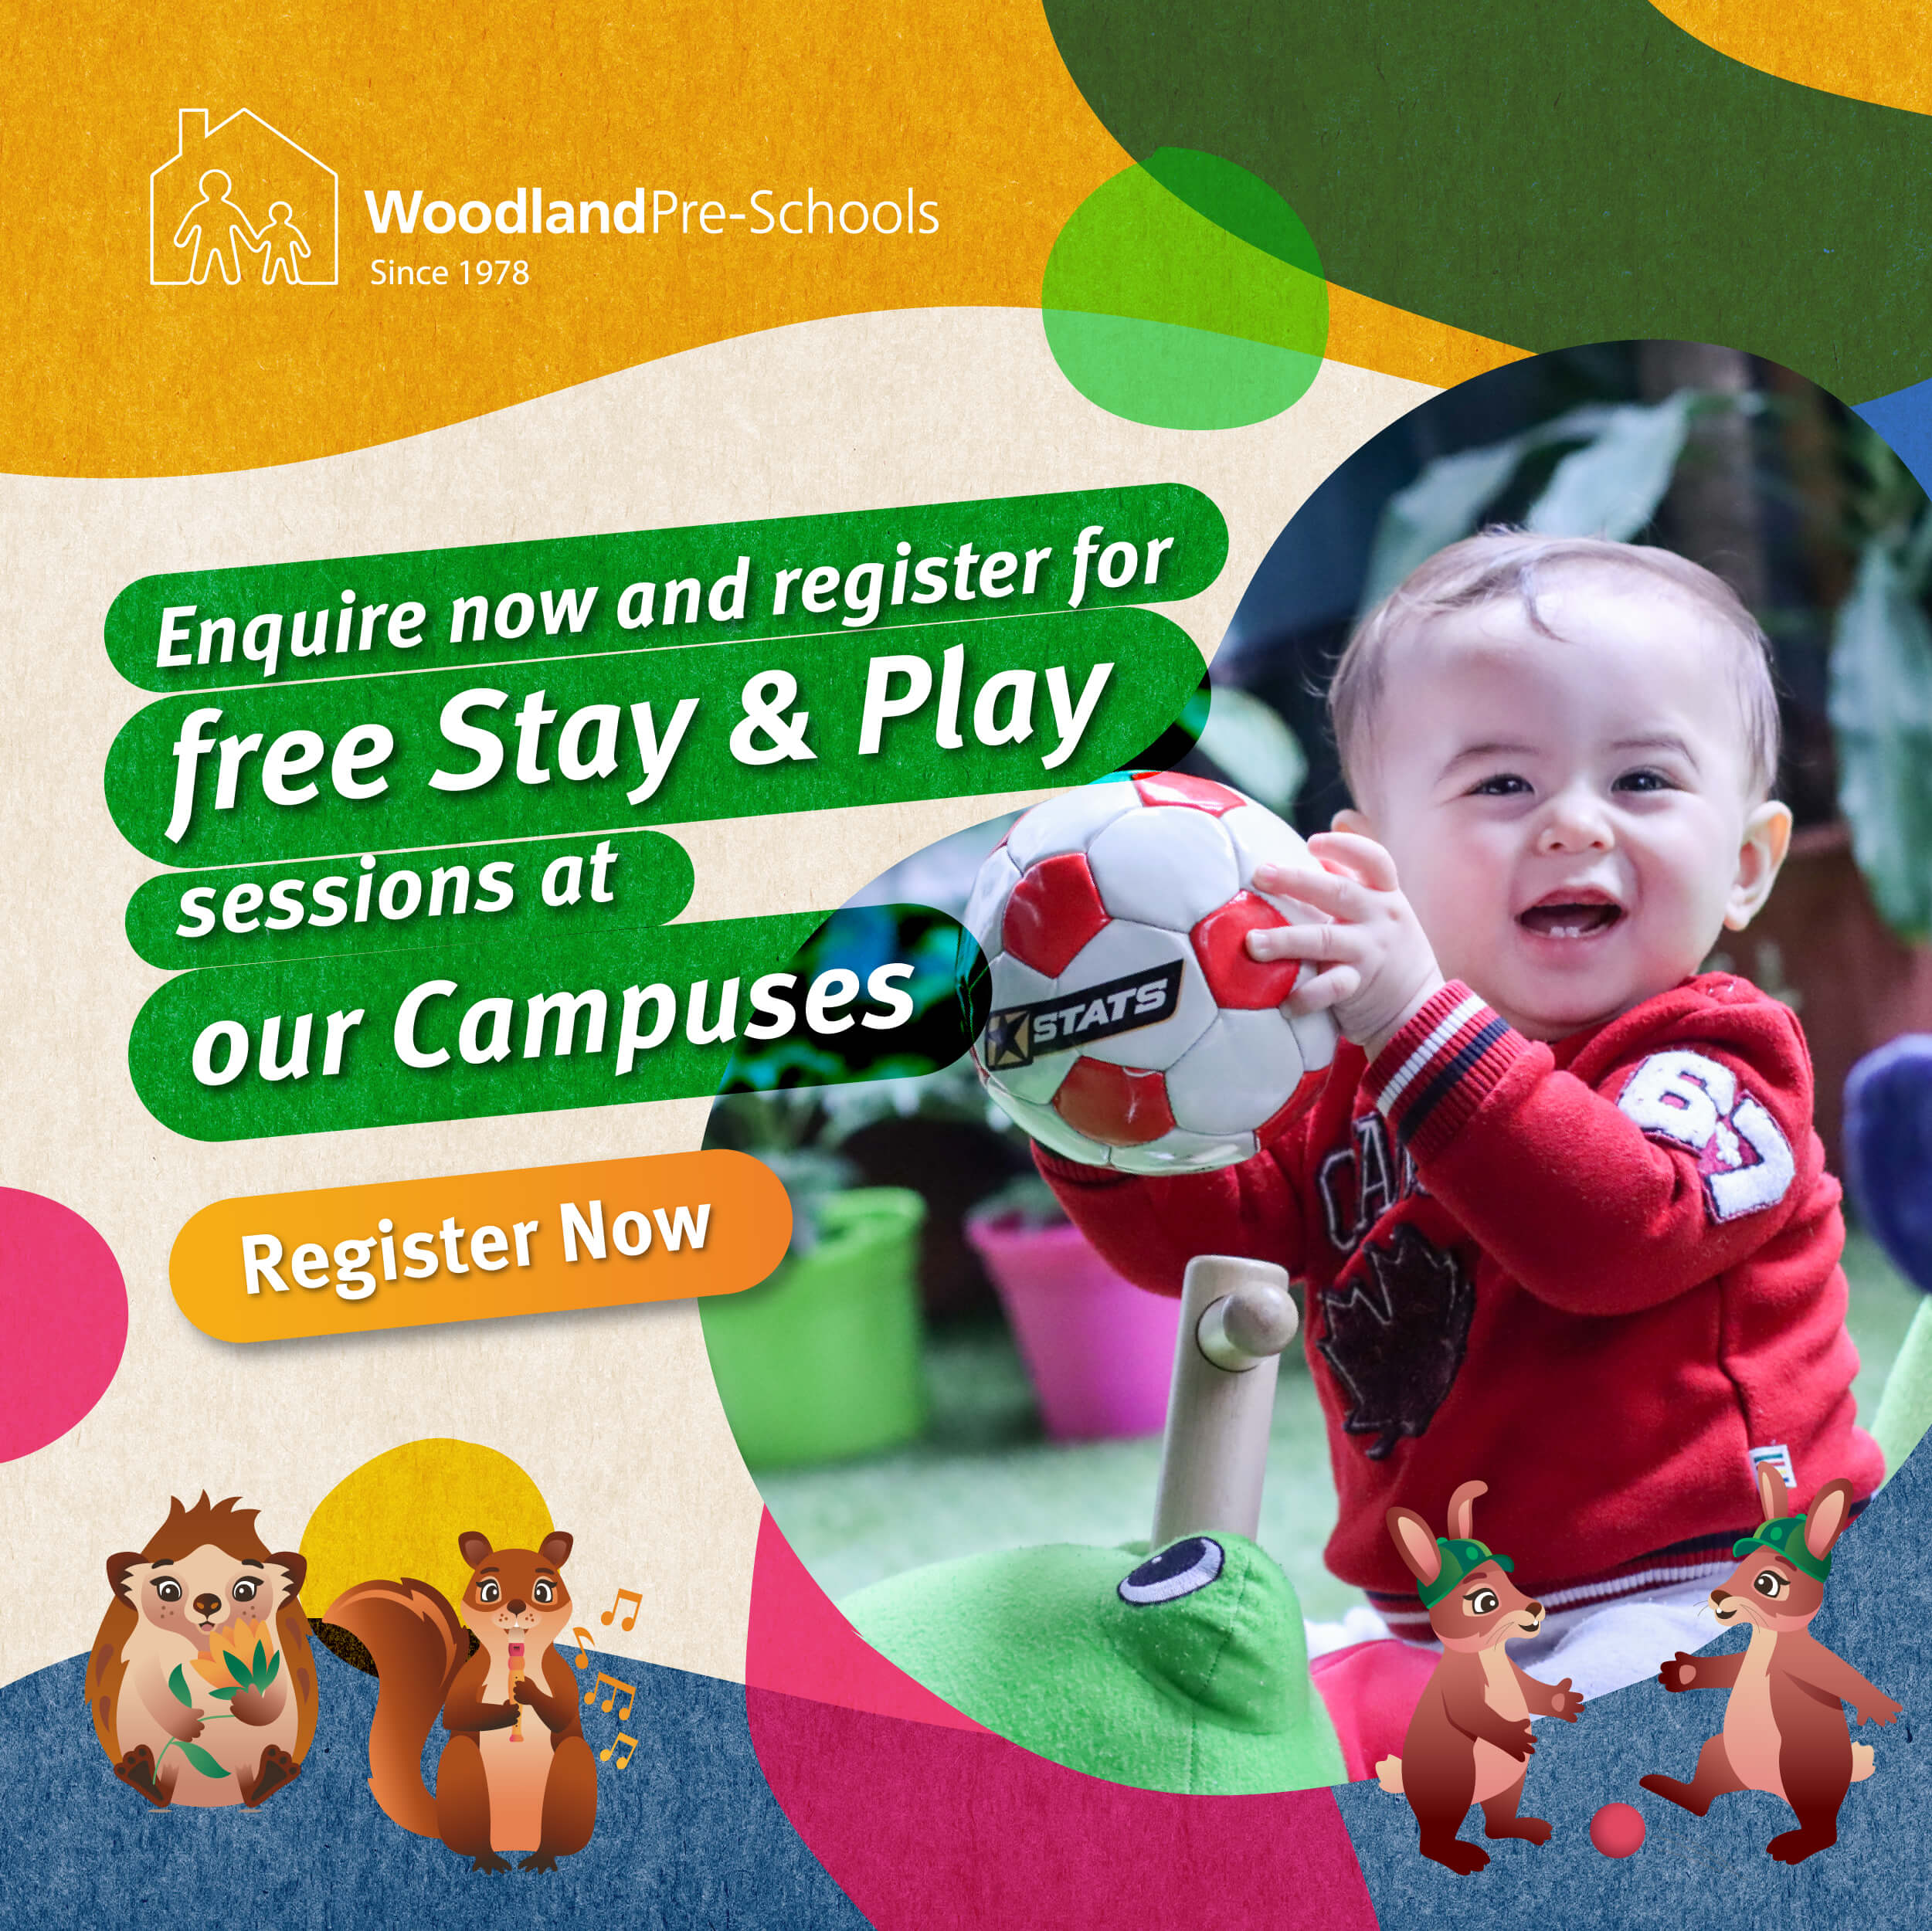 Join our free stay and play sessions at Woodland Preschools